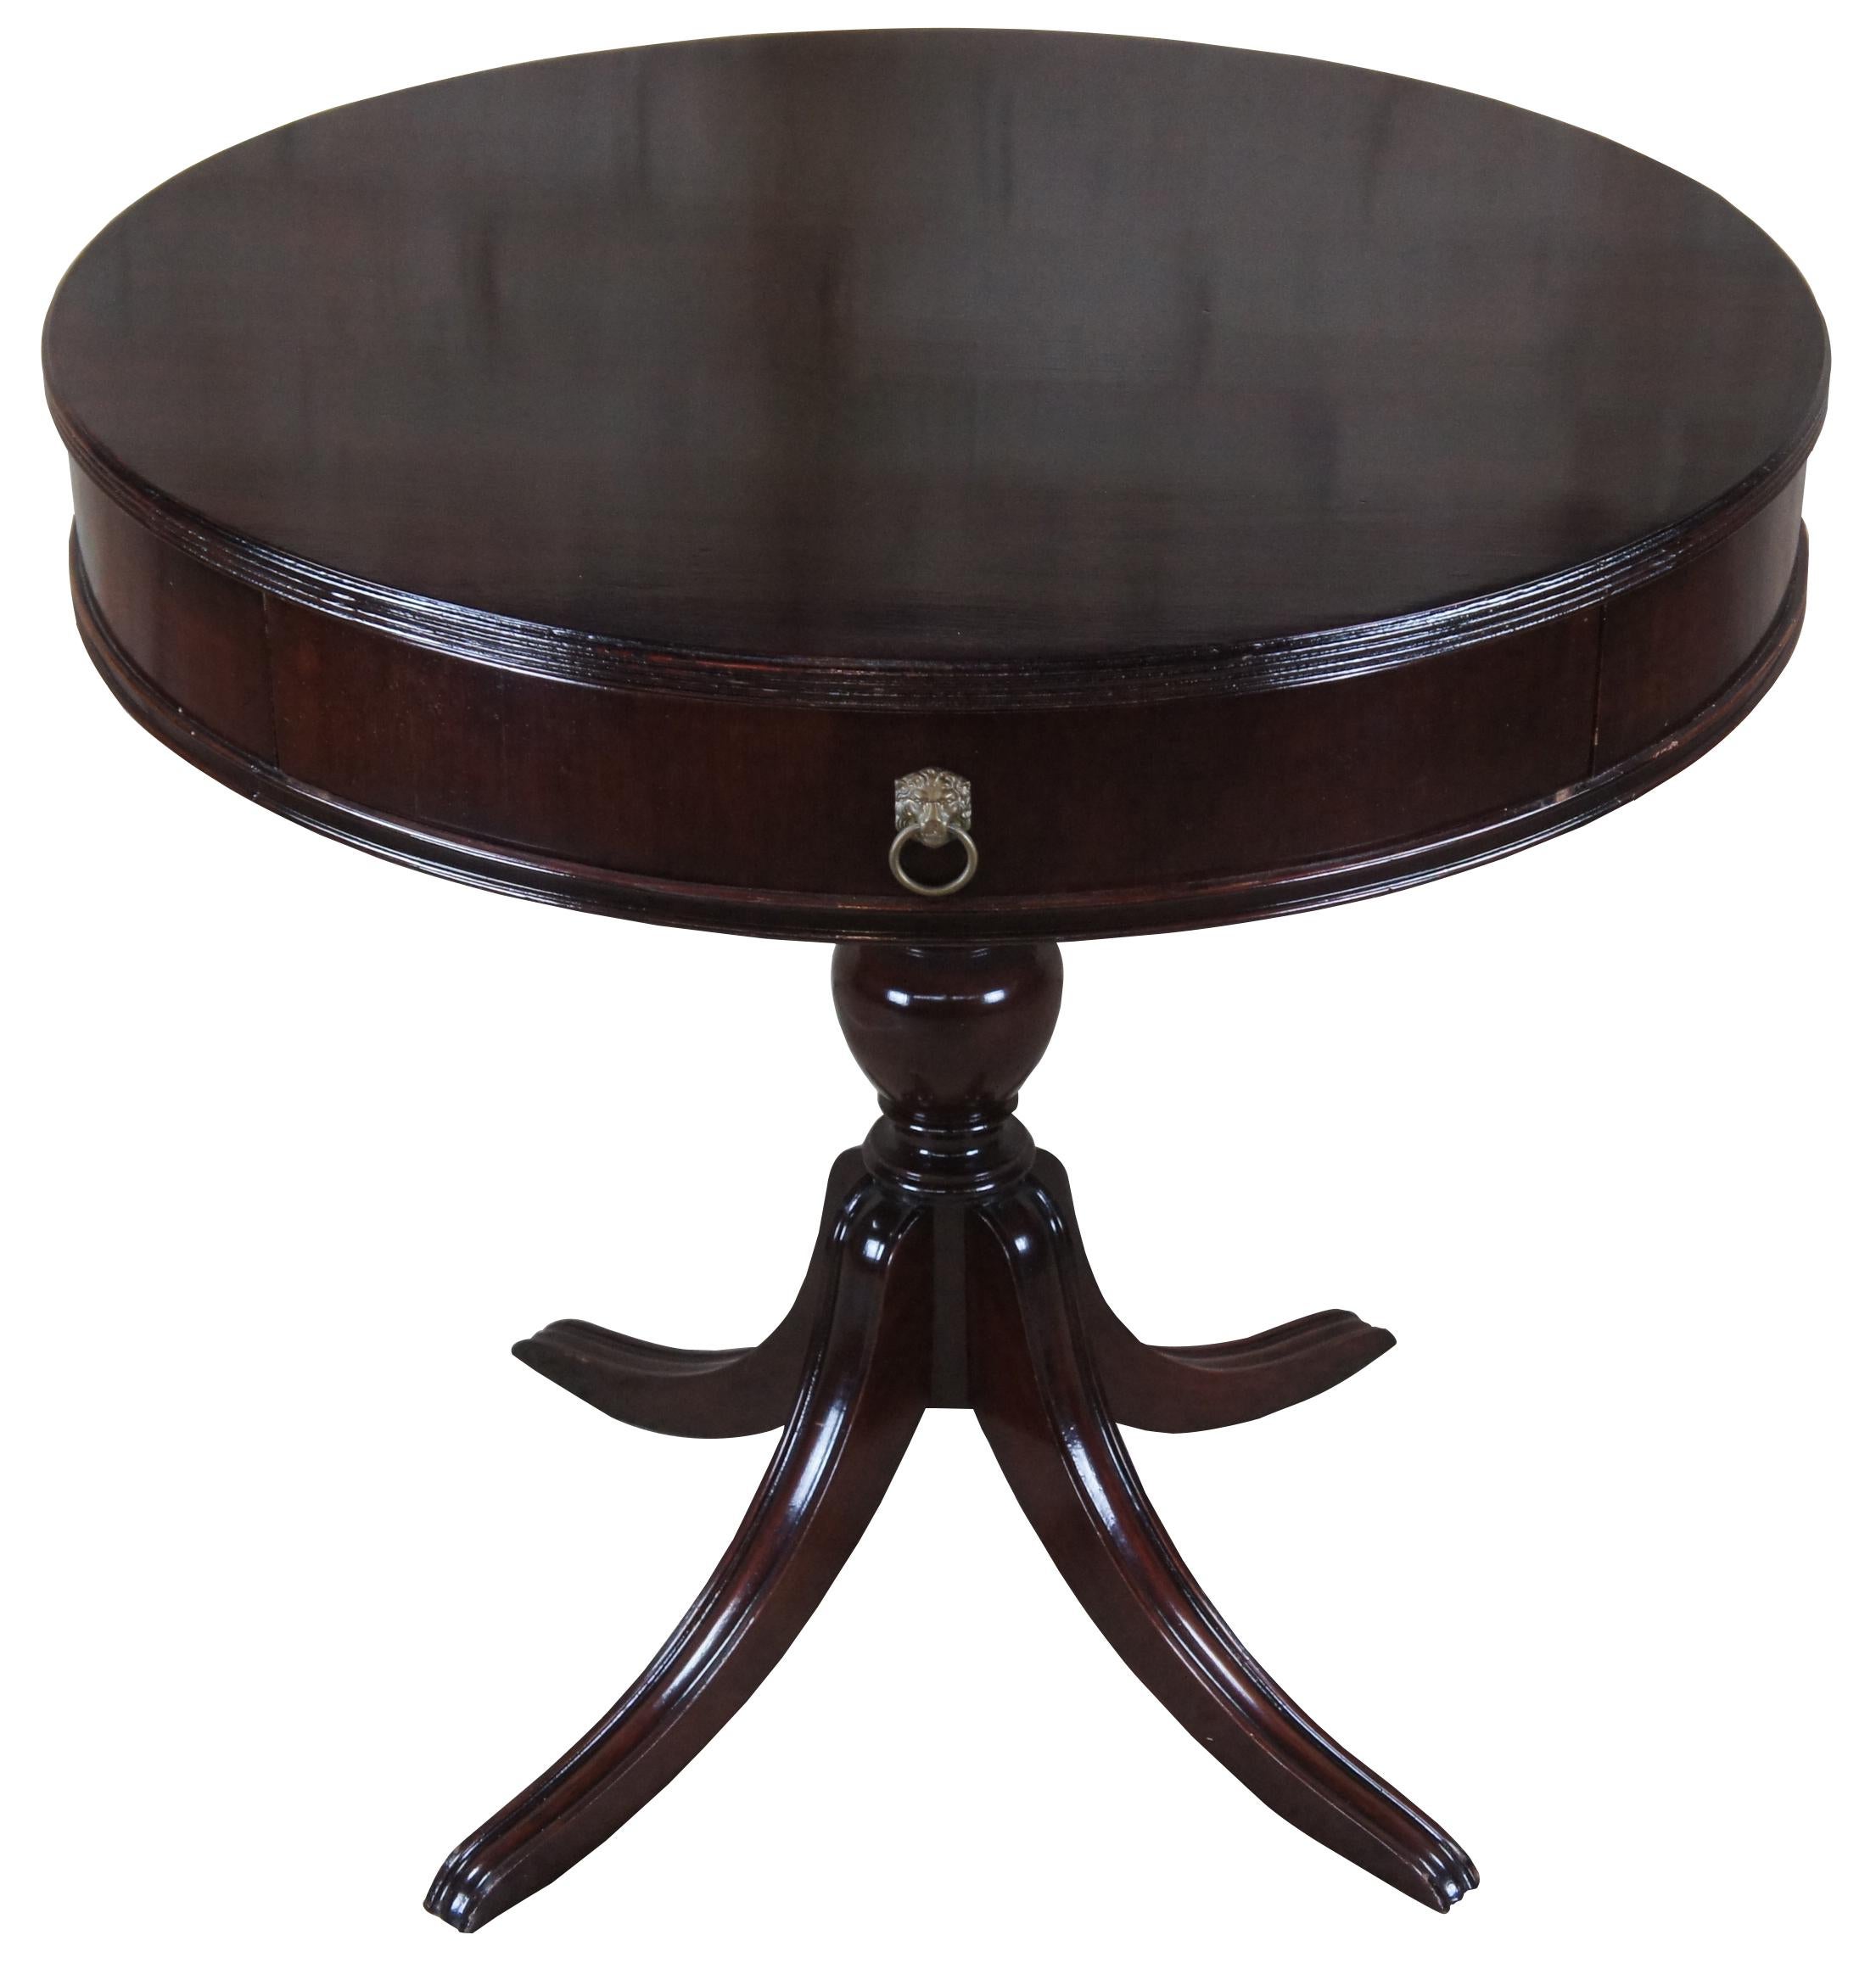 Sheraton style mid 20th century mahogany drum table with glass top. Features a round top with fluted edge and two drawers over a turned urn shaped baluster base leading to four saber legs. Includes gold lion head knockers along the drawers. A great